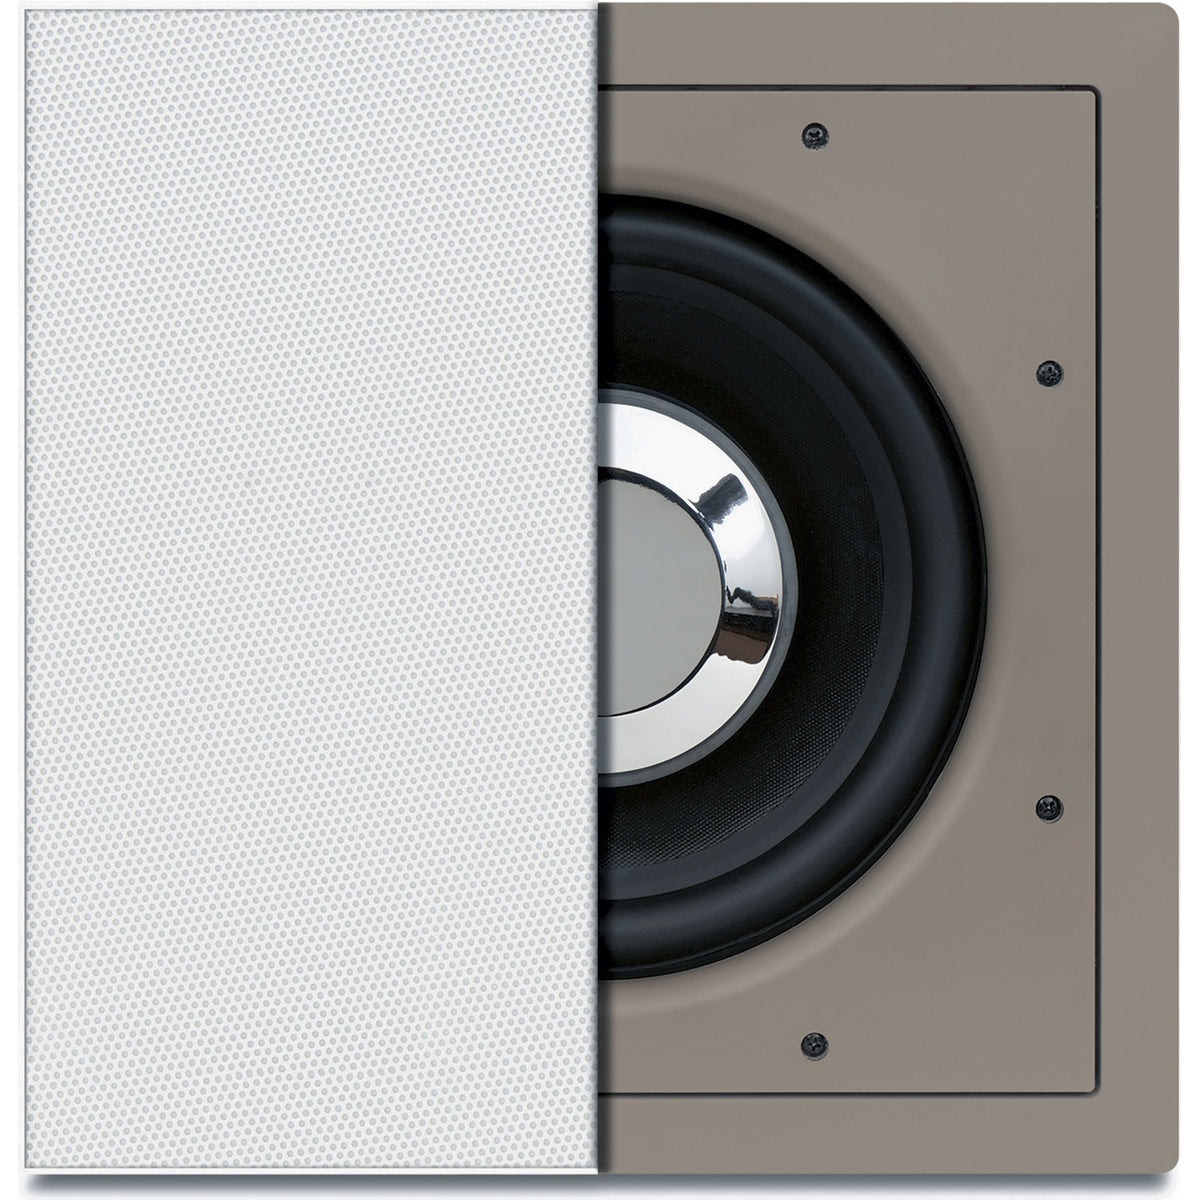 Proficient Audio Protege IWS105 In-Wall Subwoofer